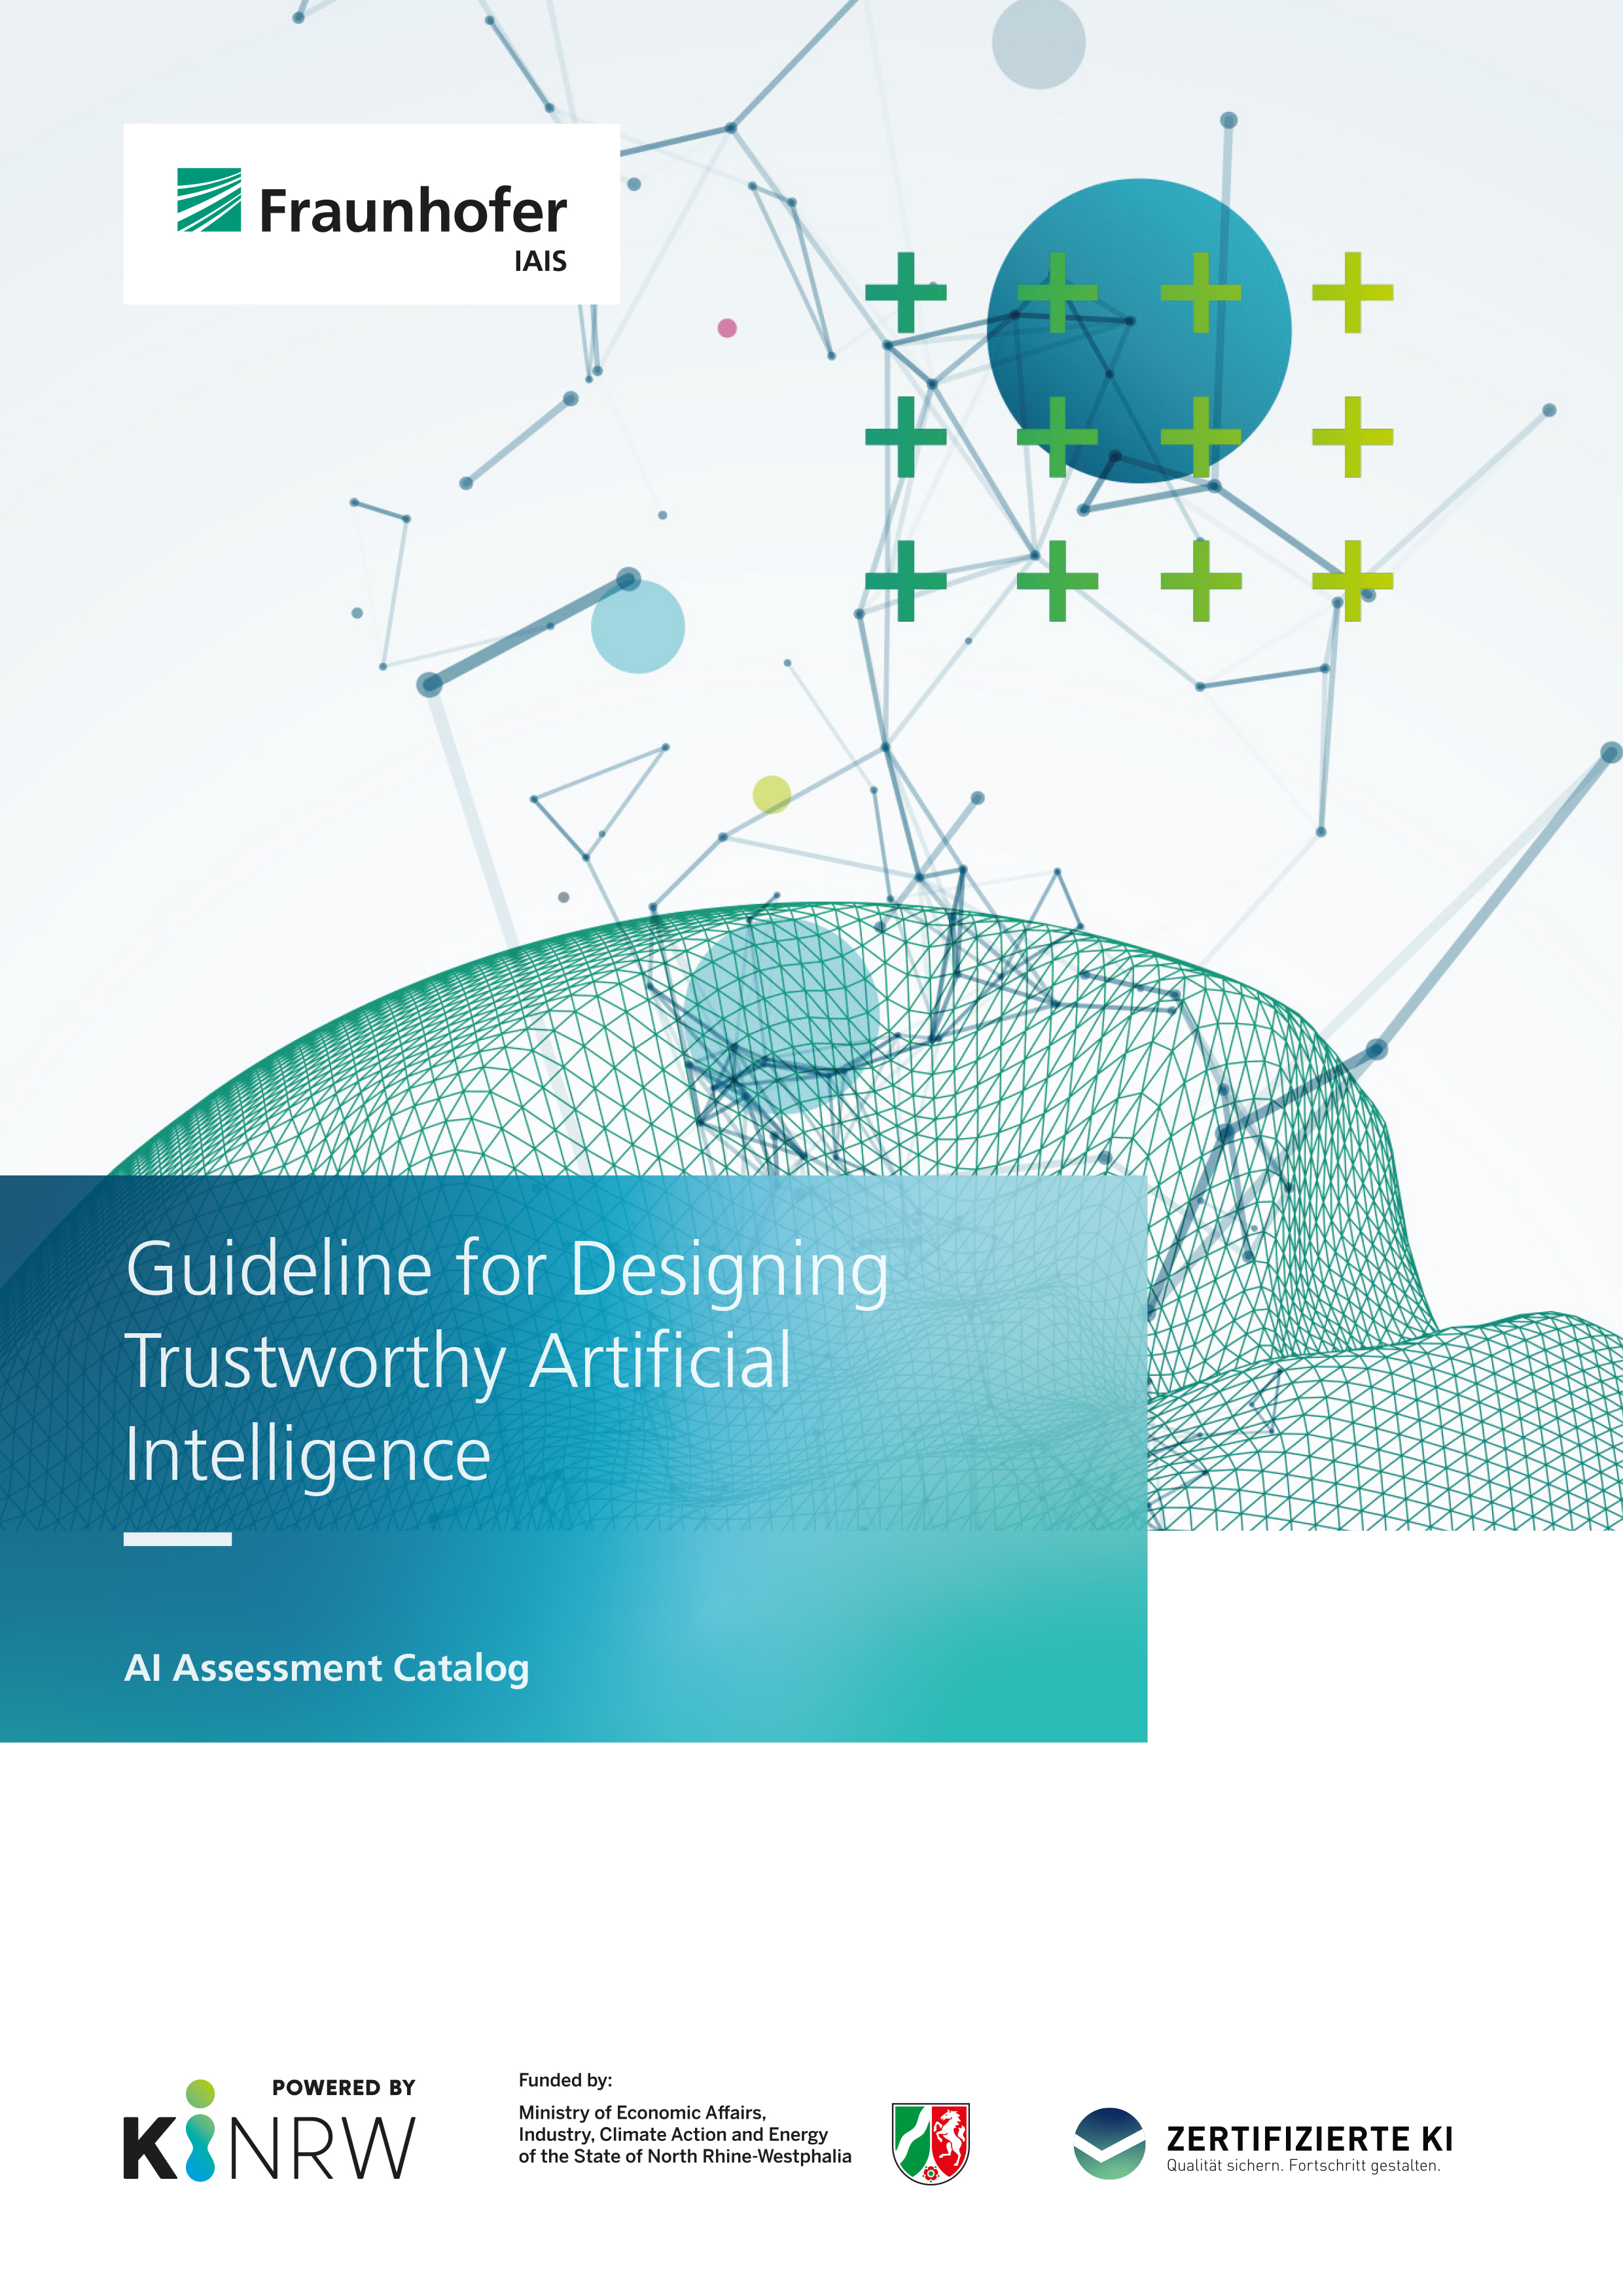 The AI Assessment Catalog from Fraunhofer IAIS provides companies with a practical guide that will empower them to design trustworthy AI systems.